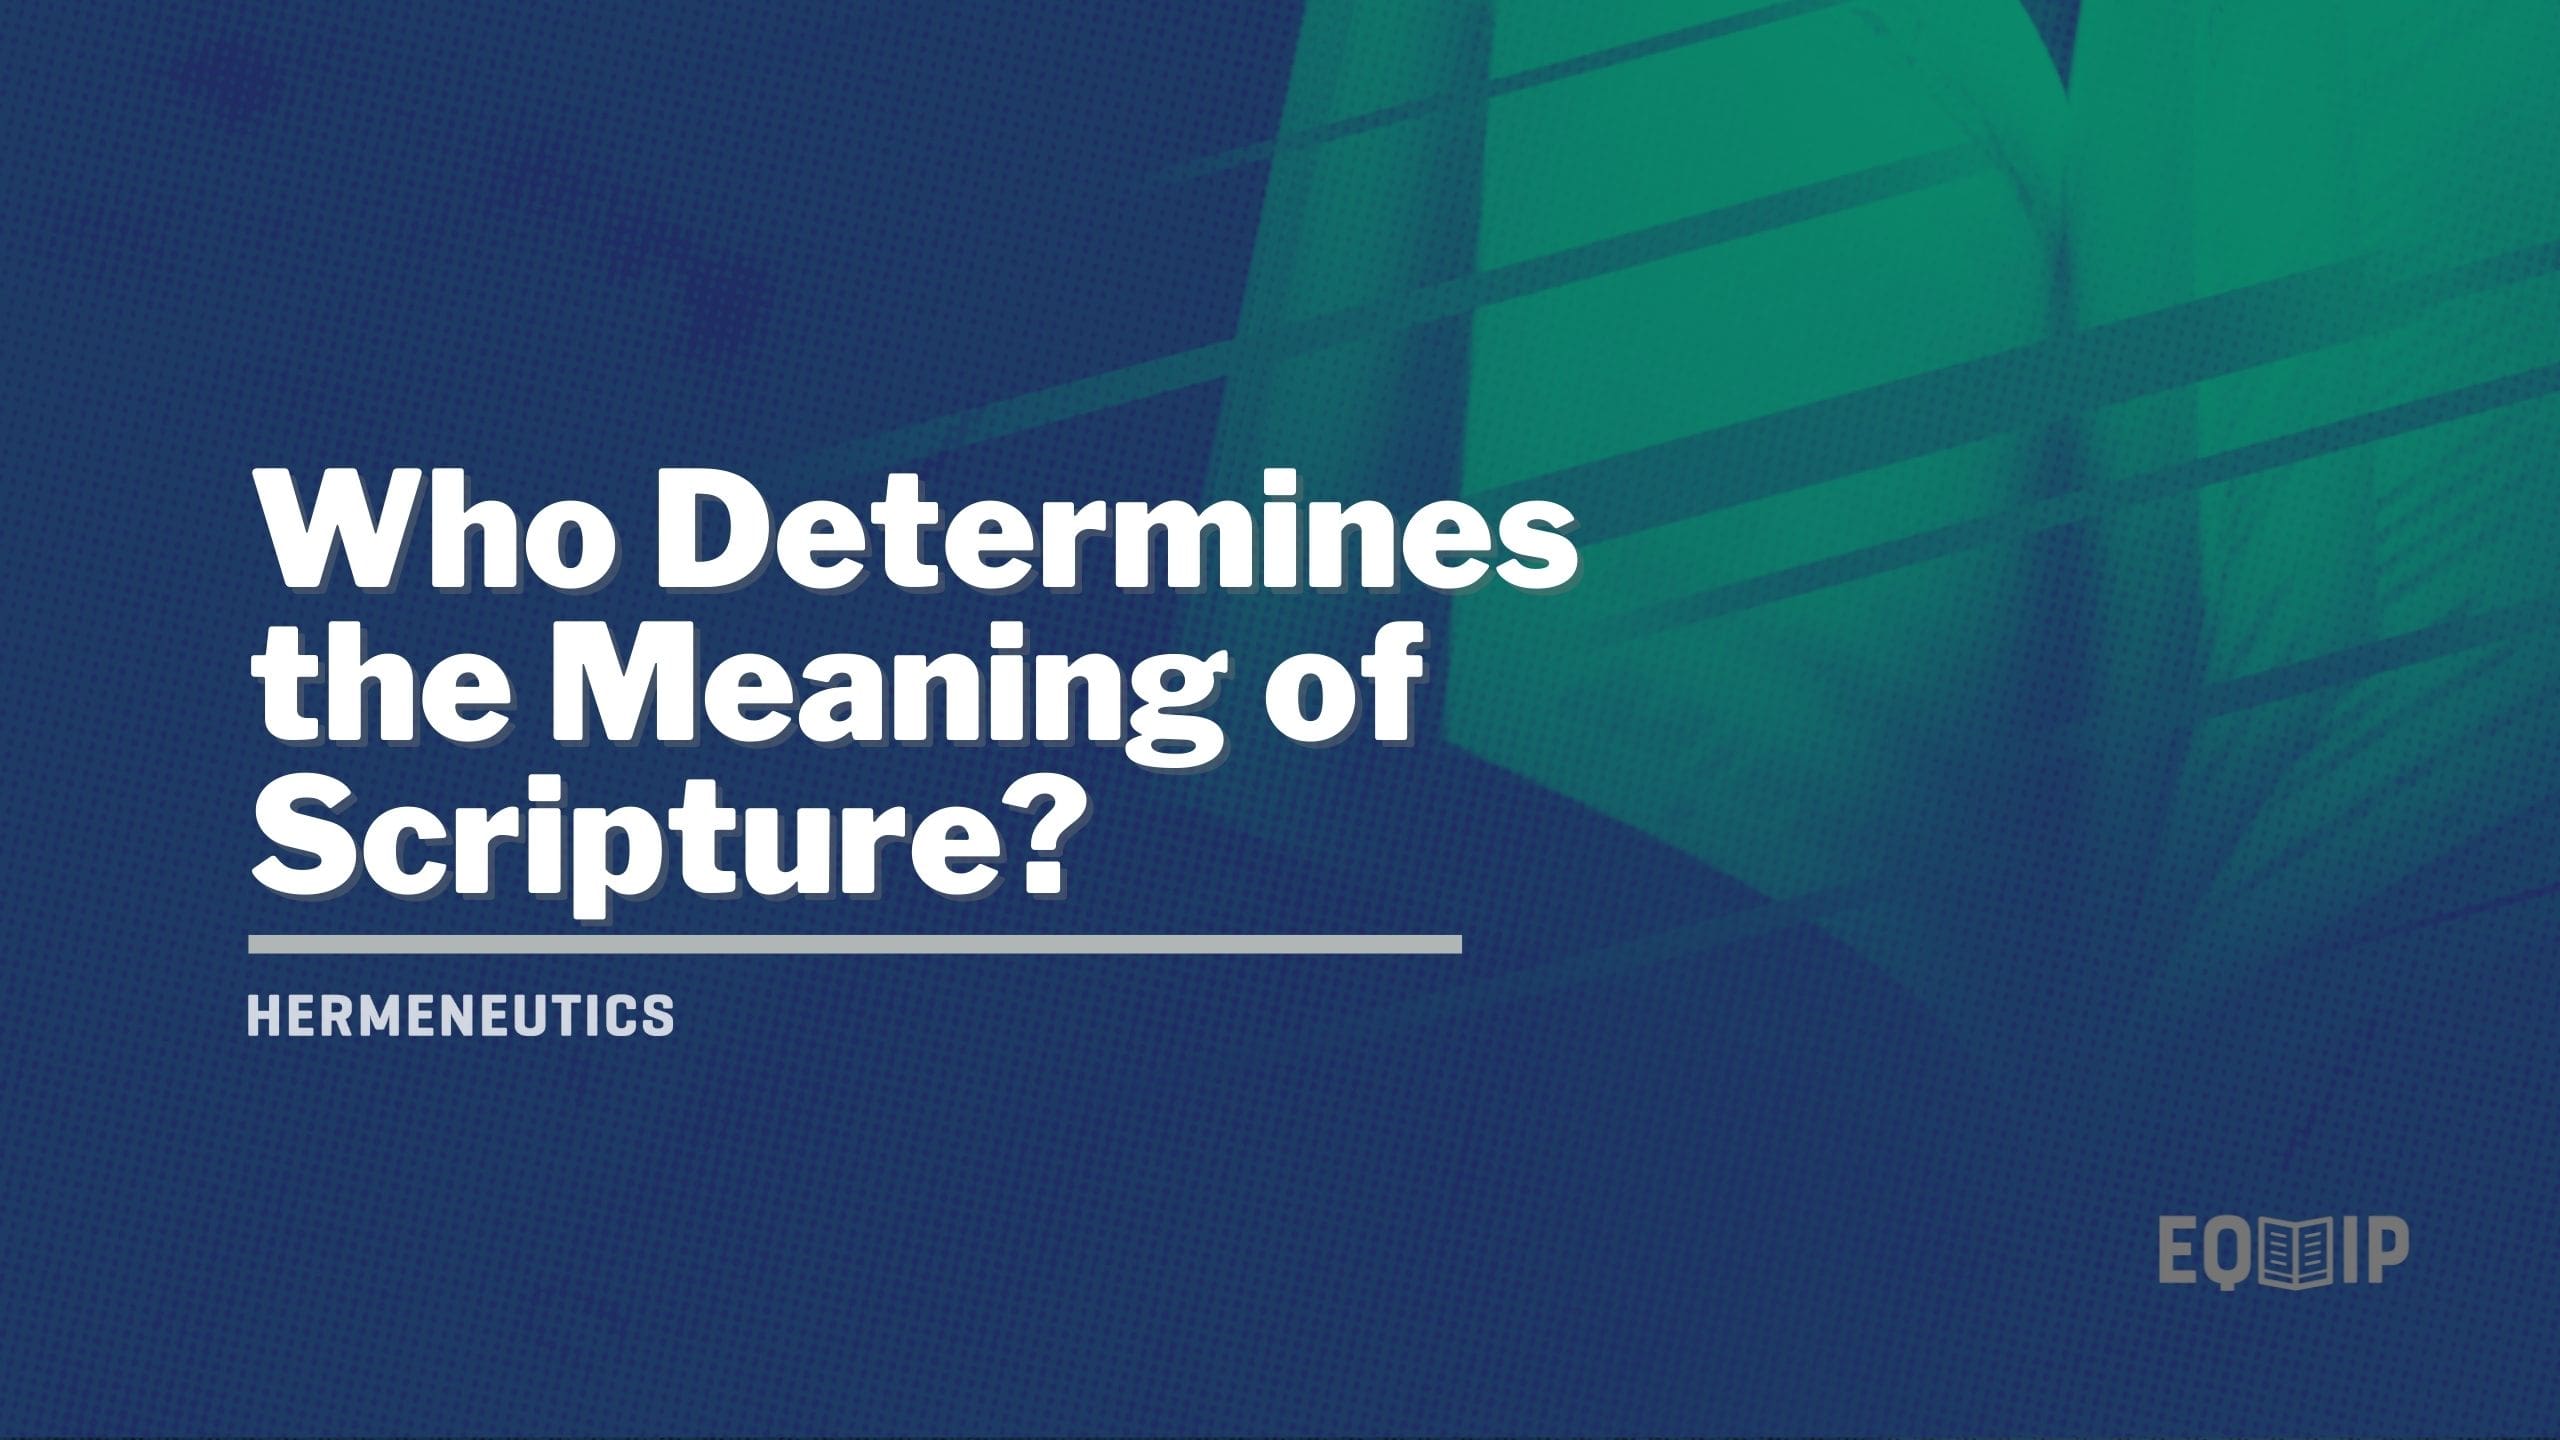 Who Determines the Meaning of Scripture?